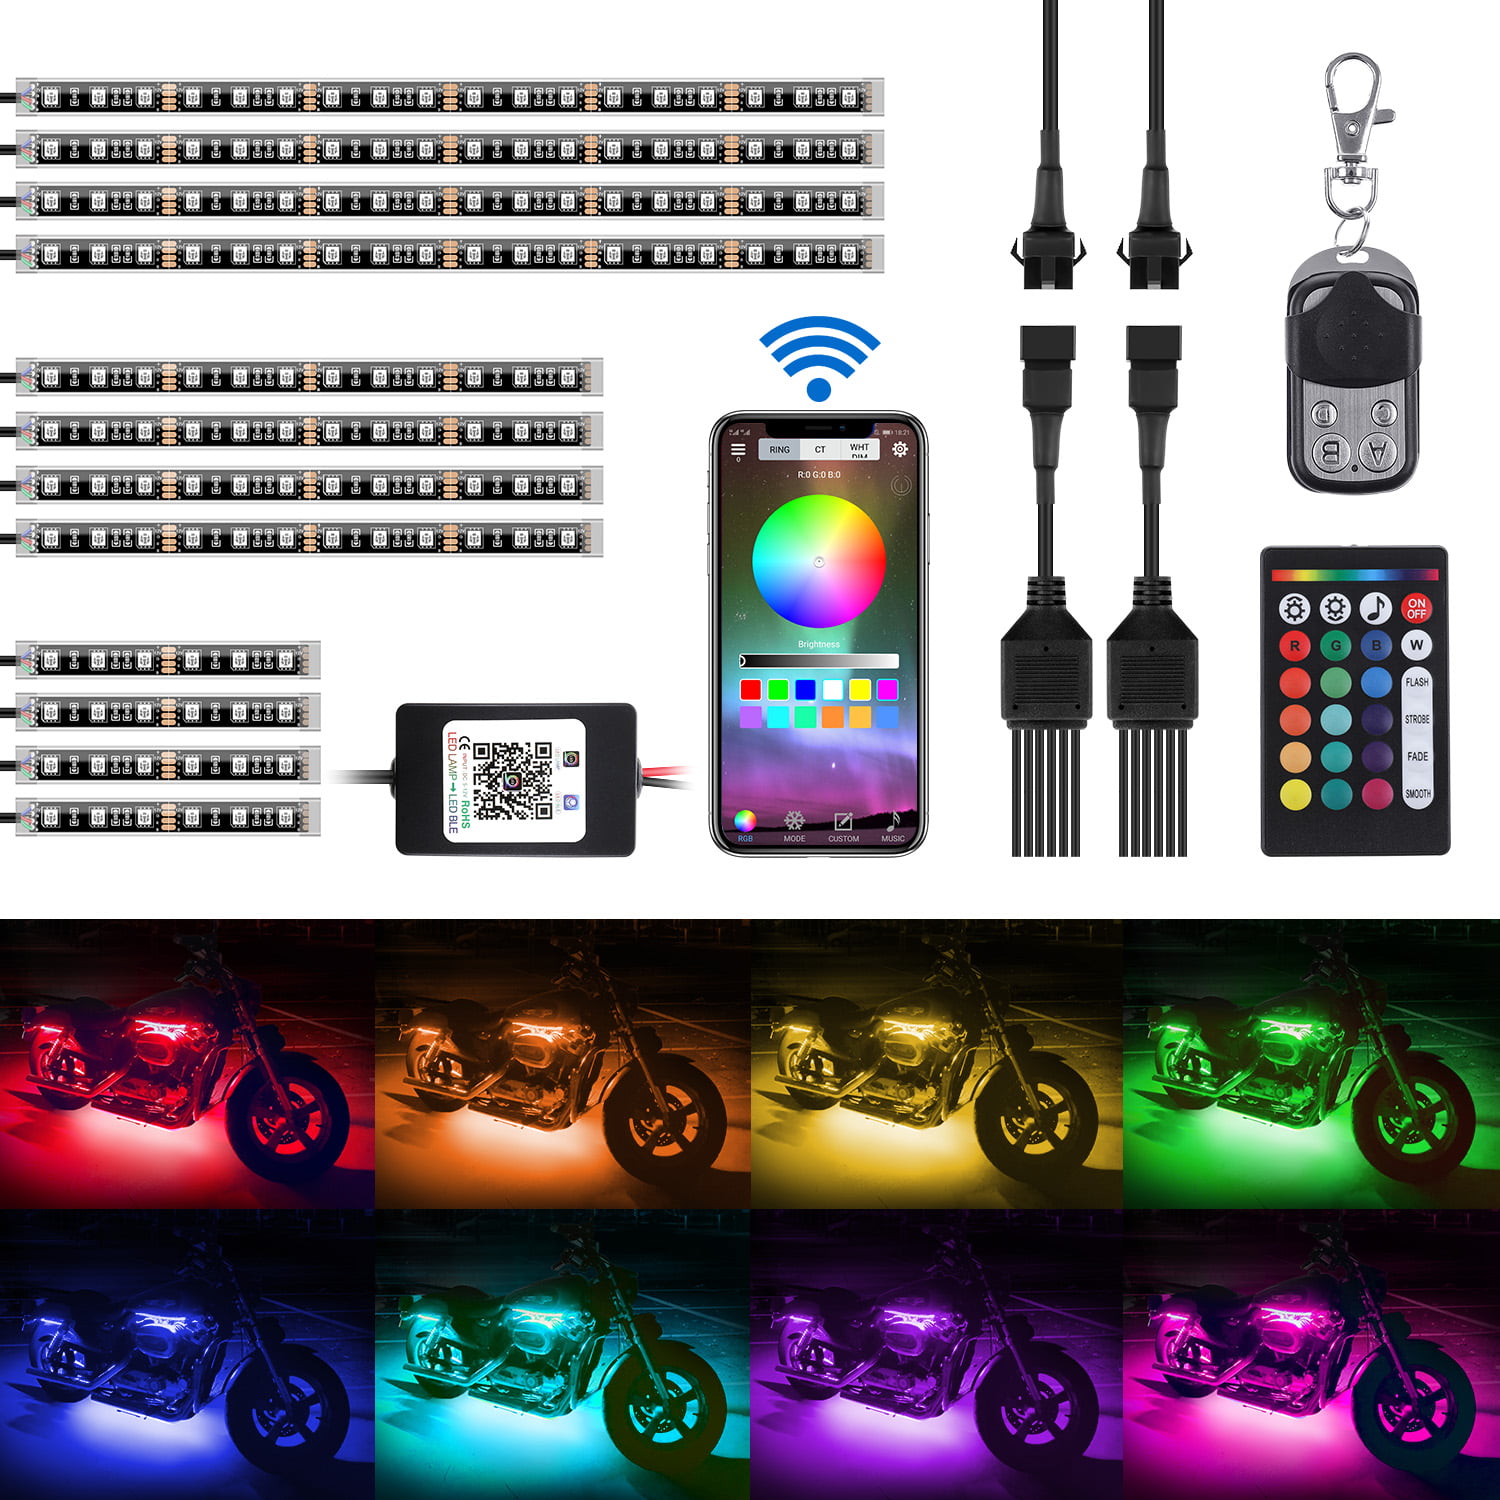 Heart Horse Motorcycle LED Light Kit RGB Multi-Color Flexible Strips Light Kit with Wireless Remote Control